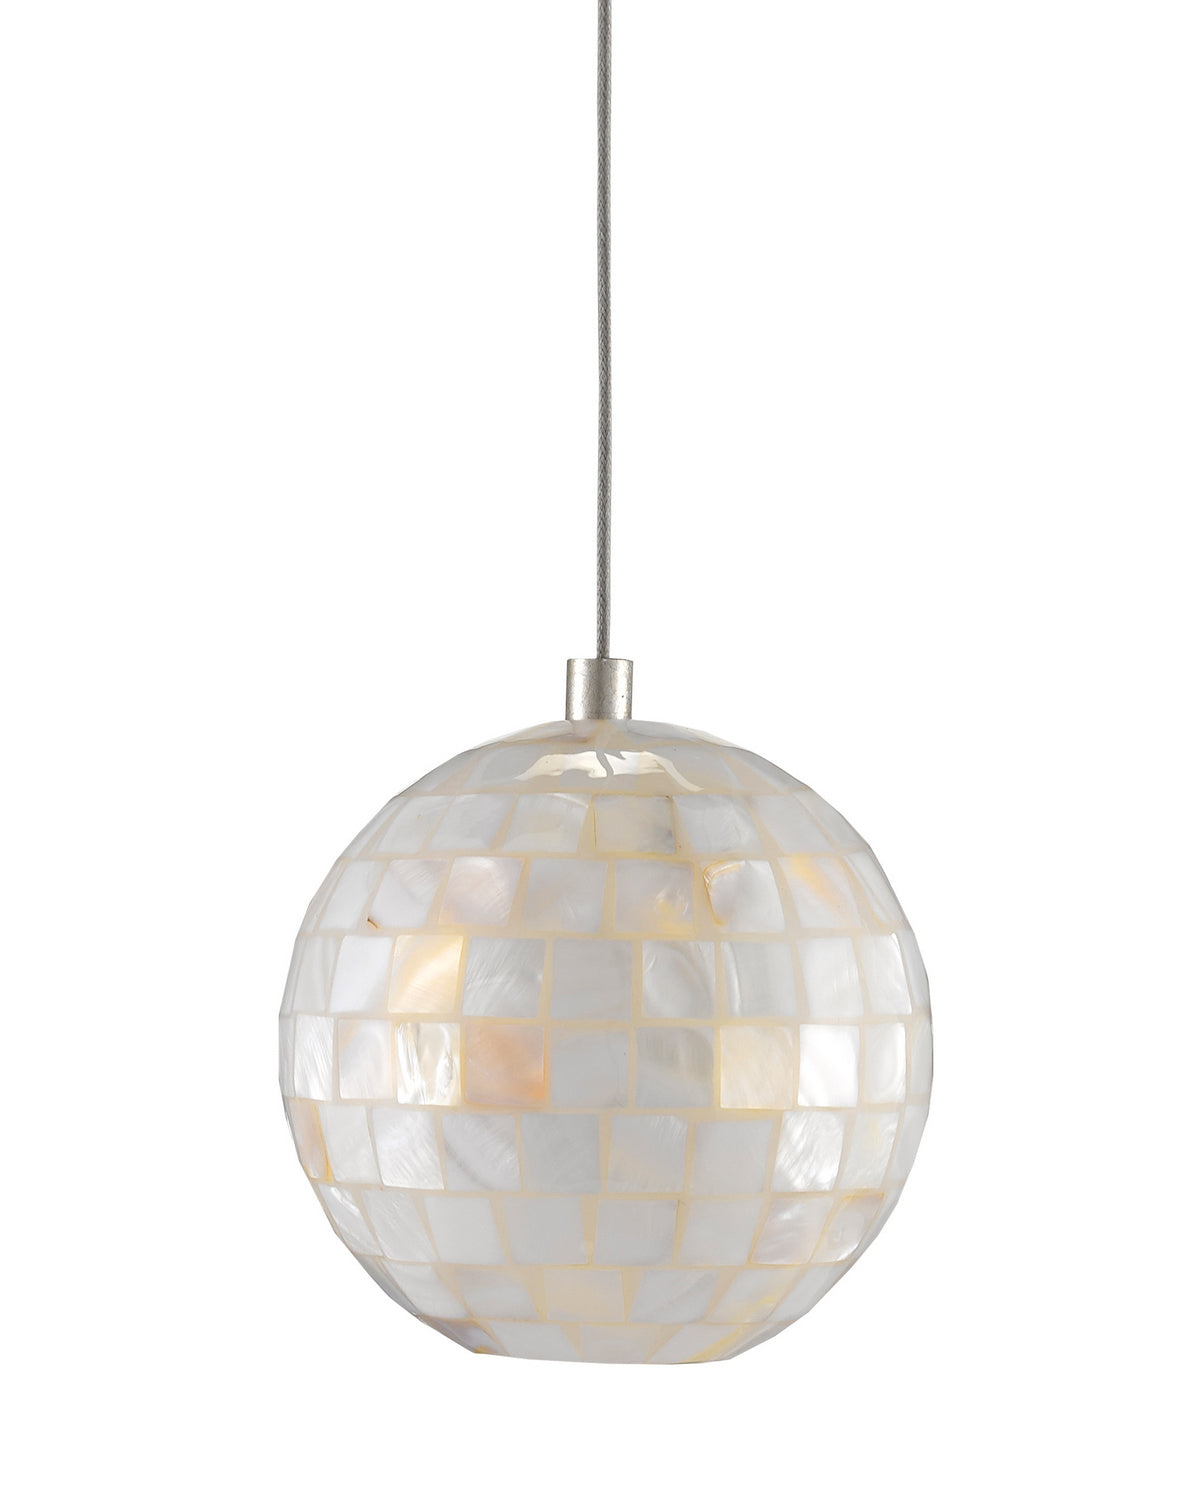 One Light Pendant from the Finhorn collection in Painted Silver/Pearl finish